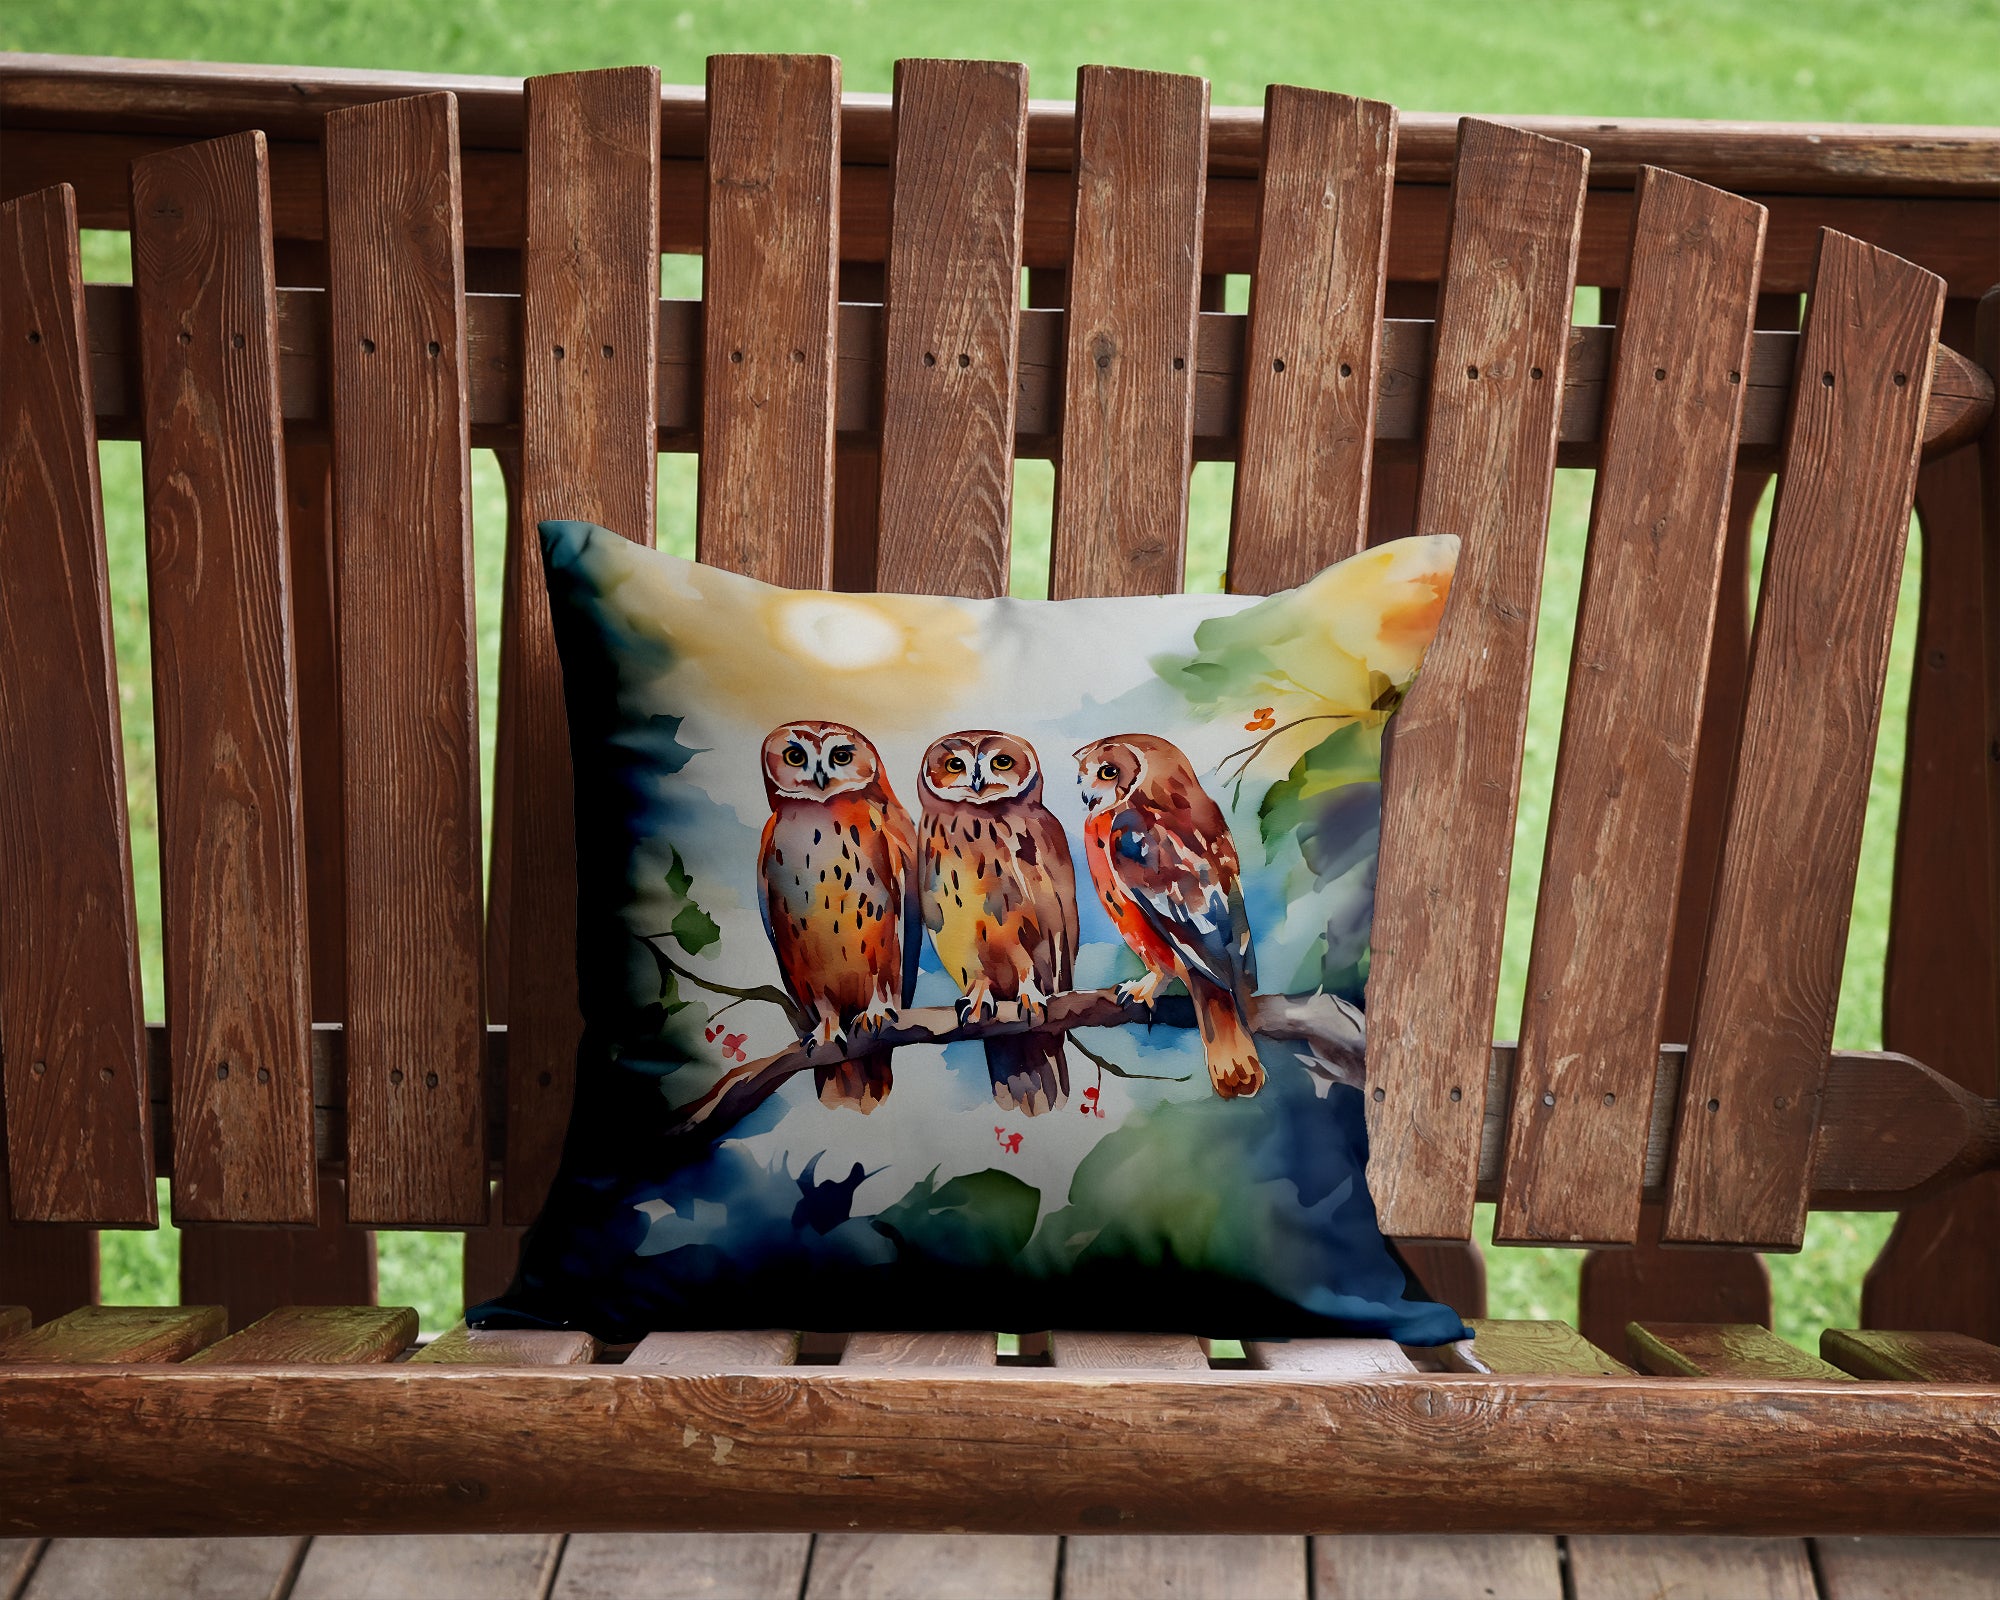 Buy this Owls Throw Pillow